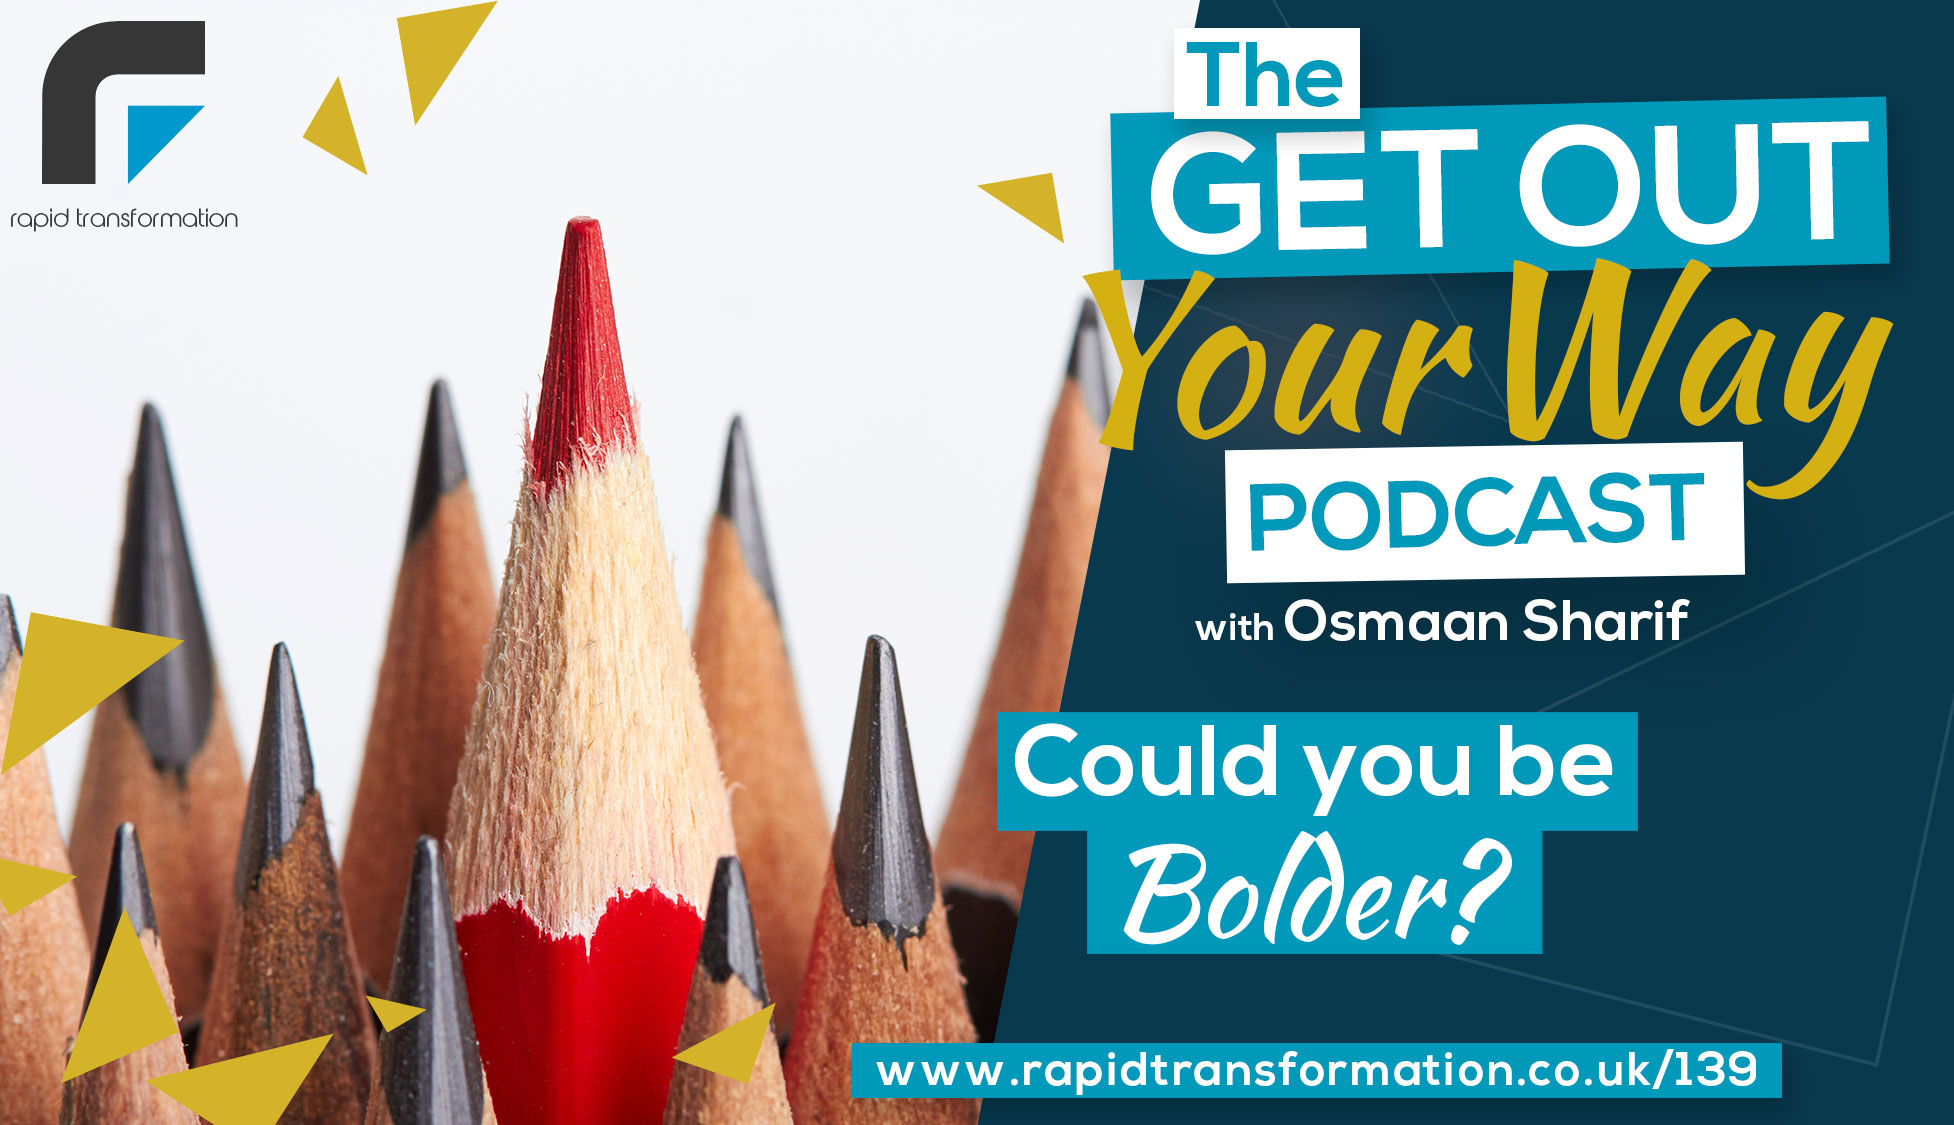 Could You Be Bolder?